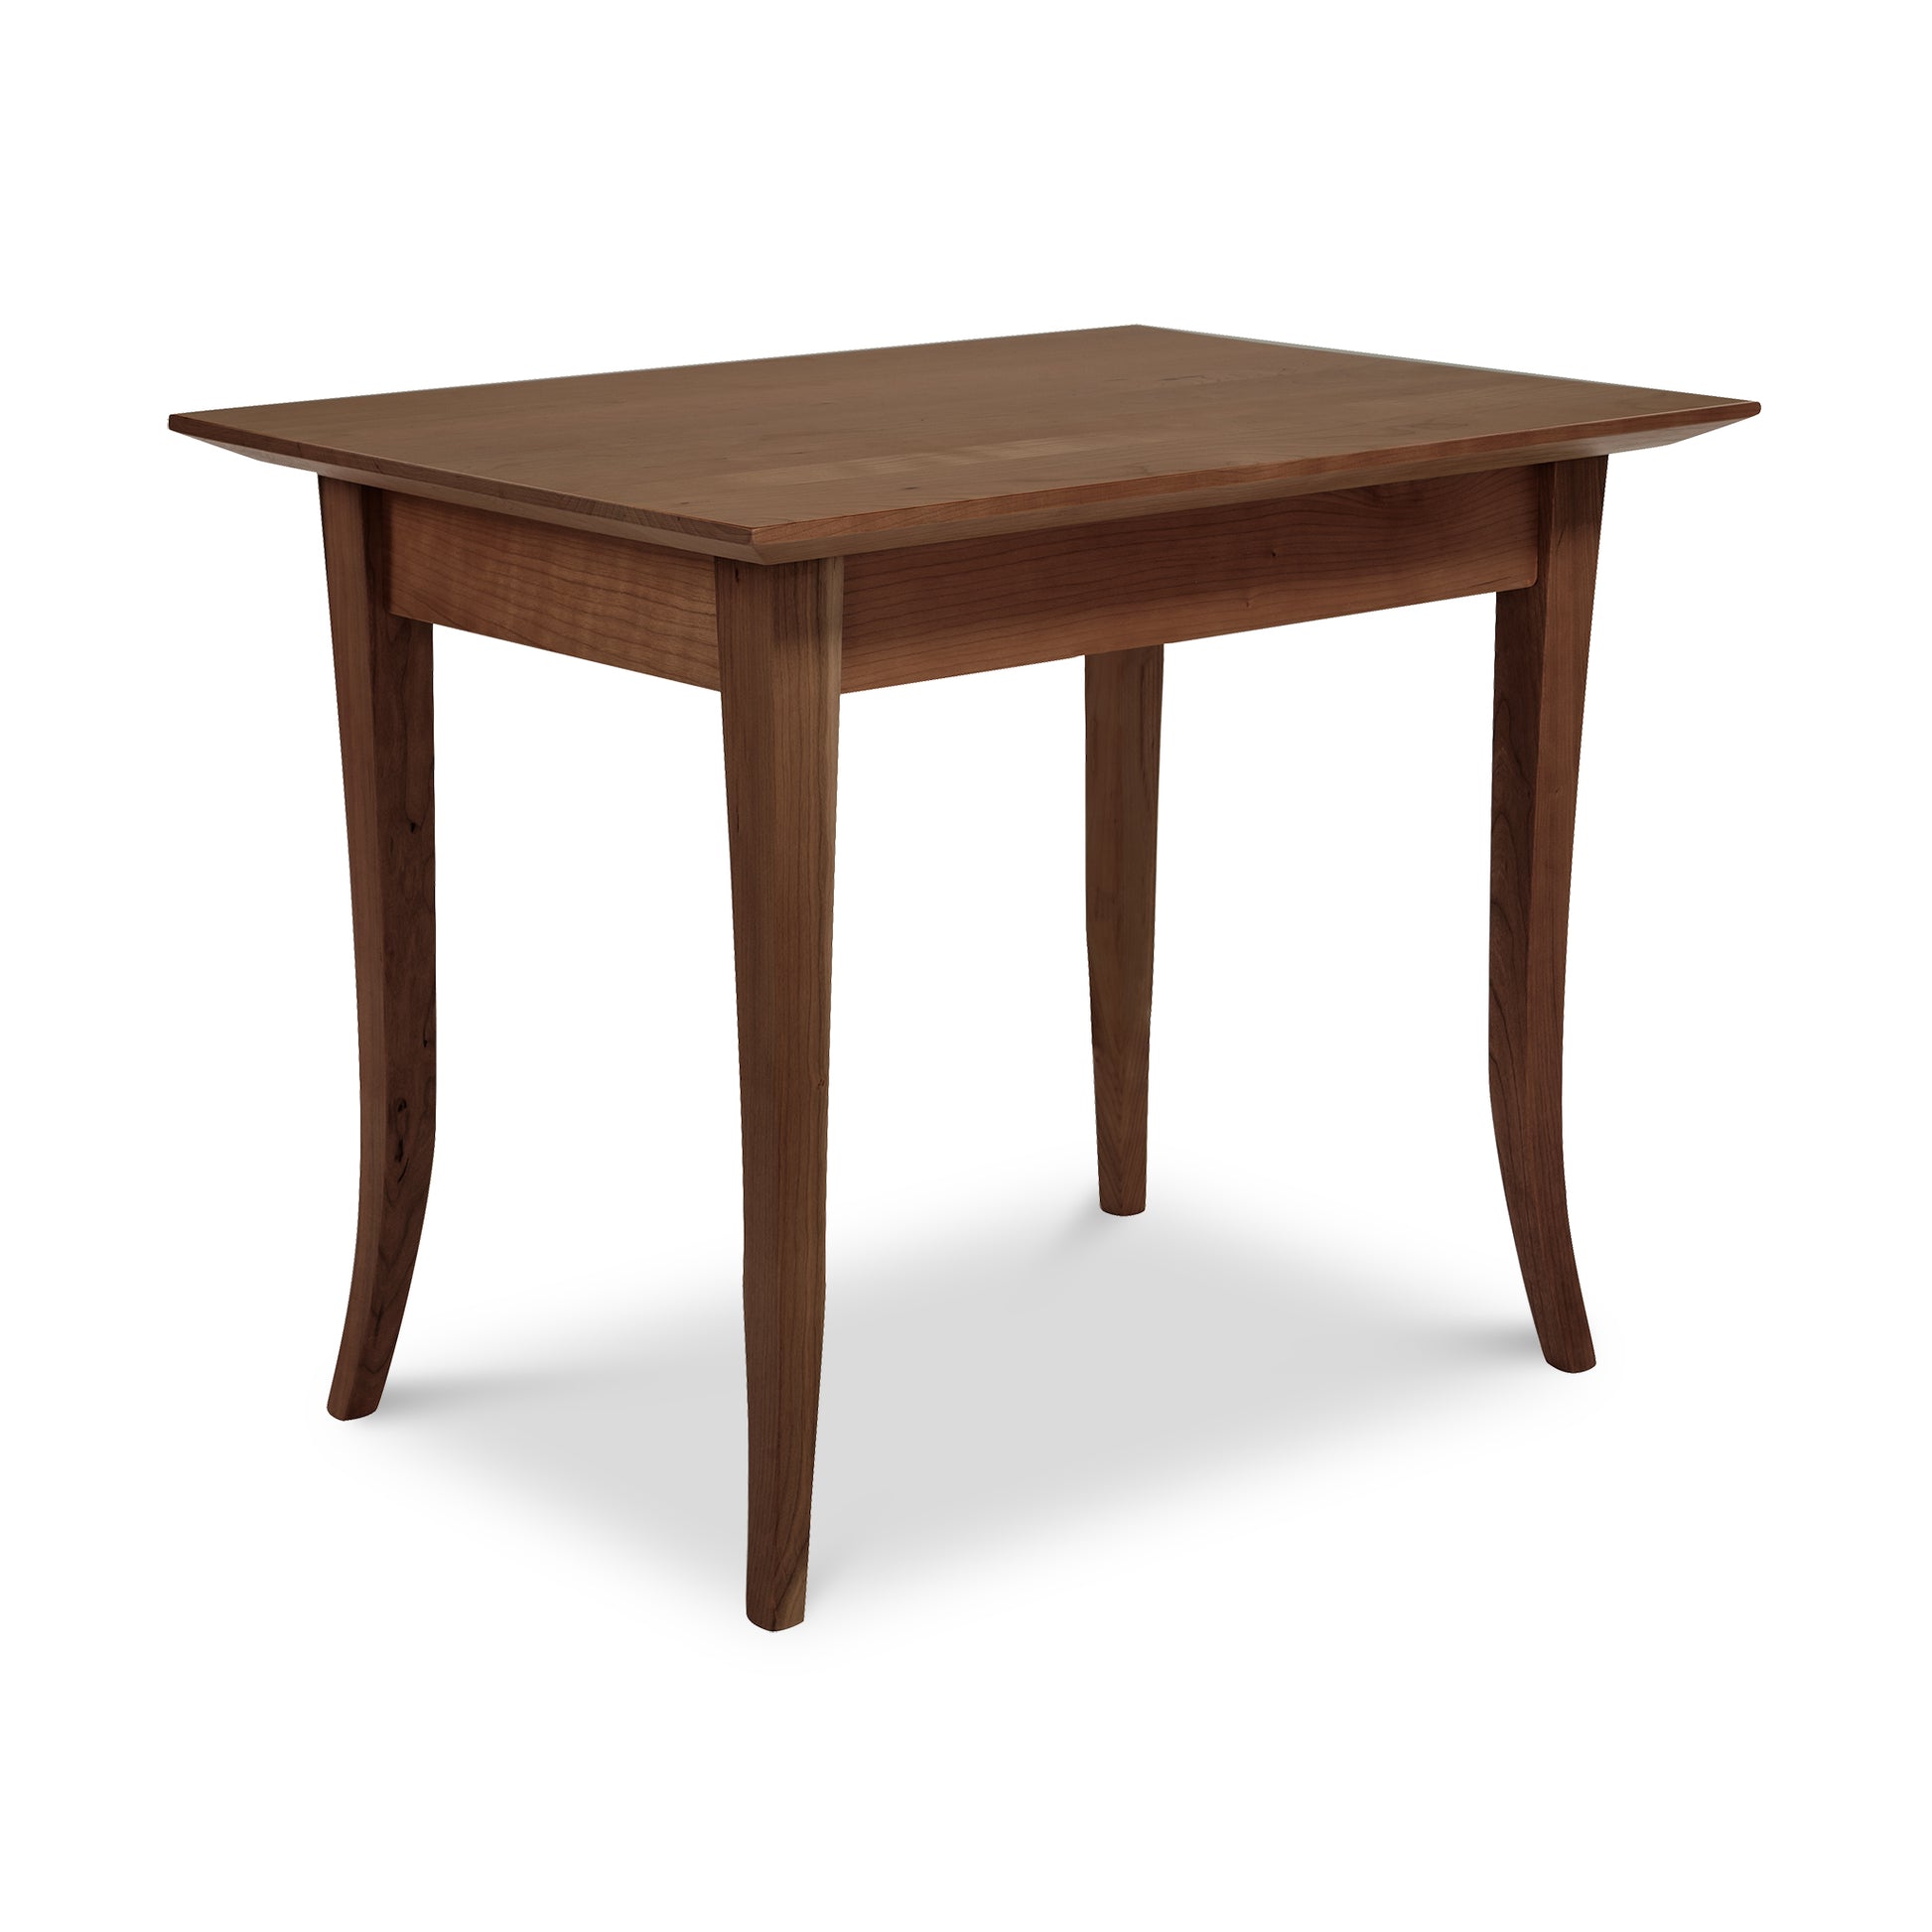 A Classic Shaker Flare Leg End Table by Lyndon Furniture, with a solid wood top and legs.